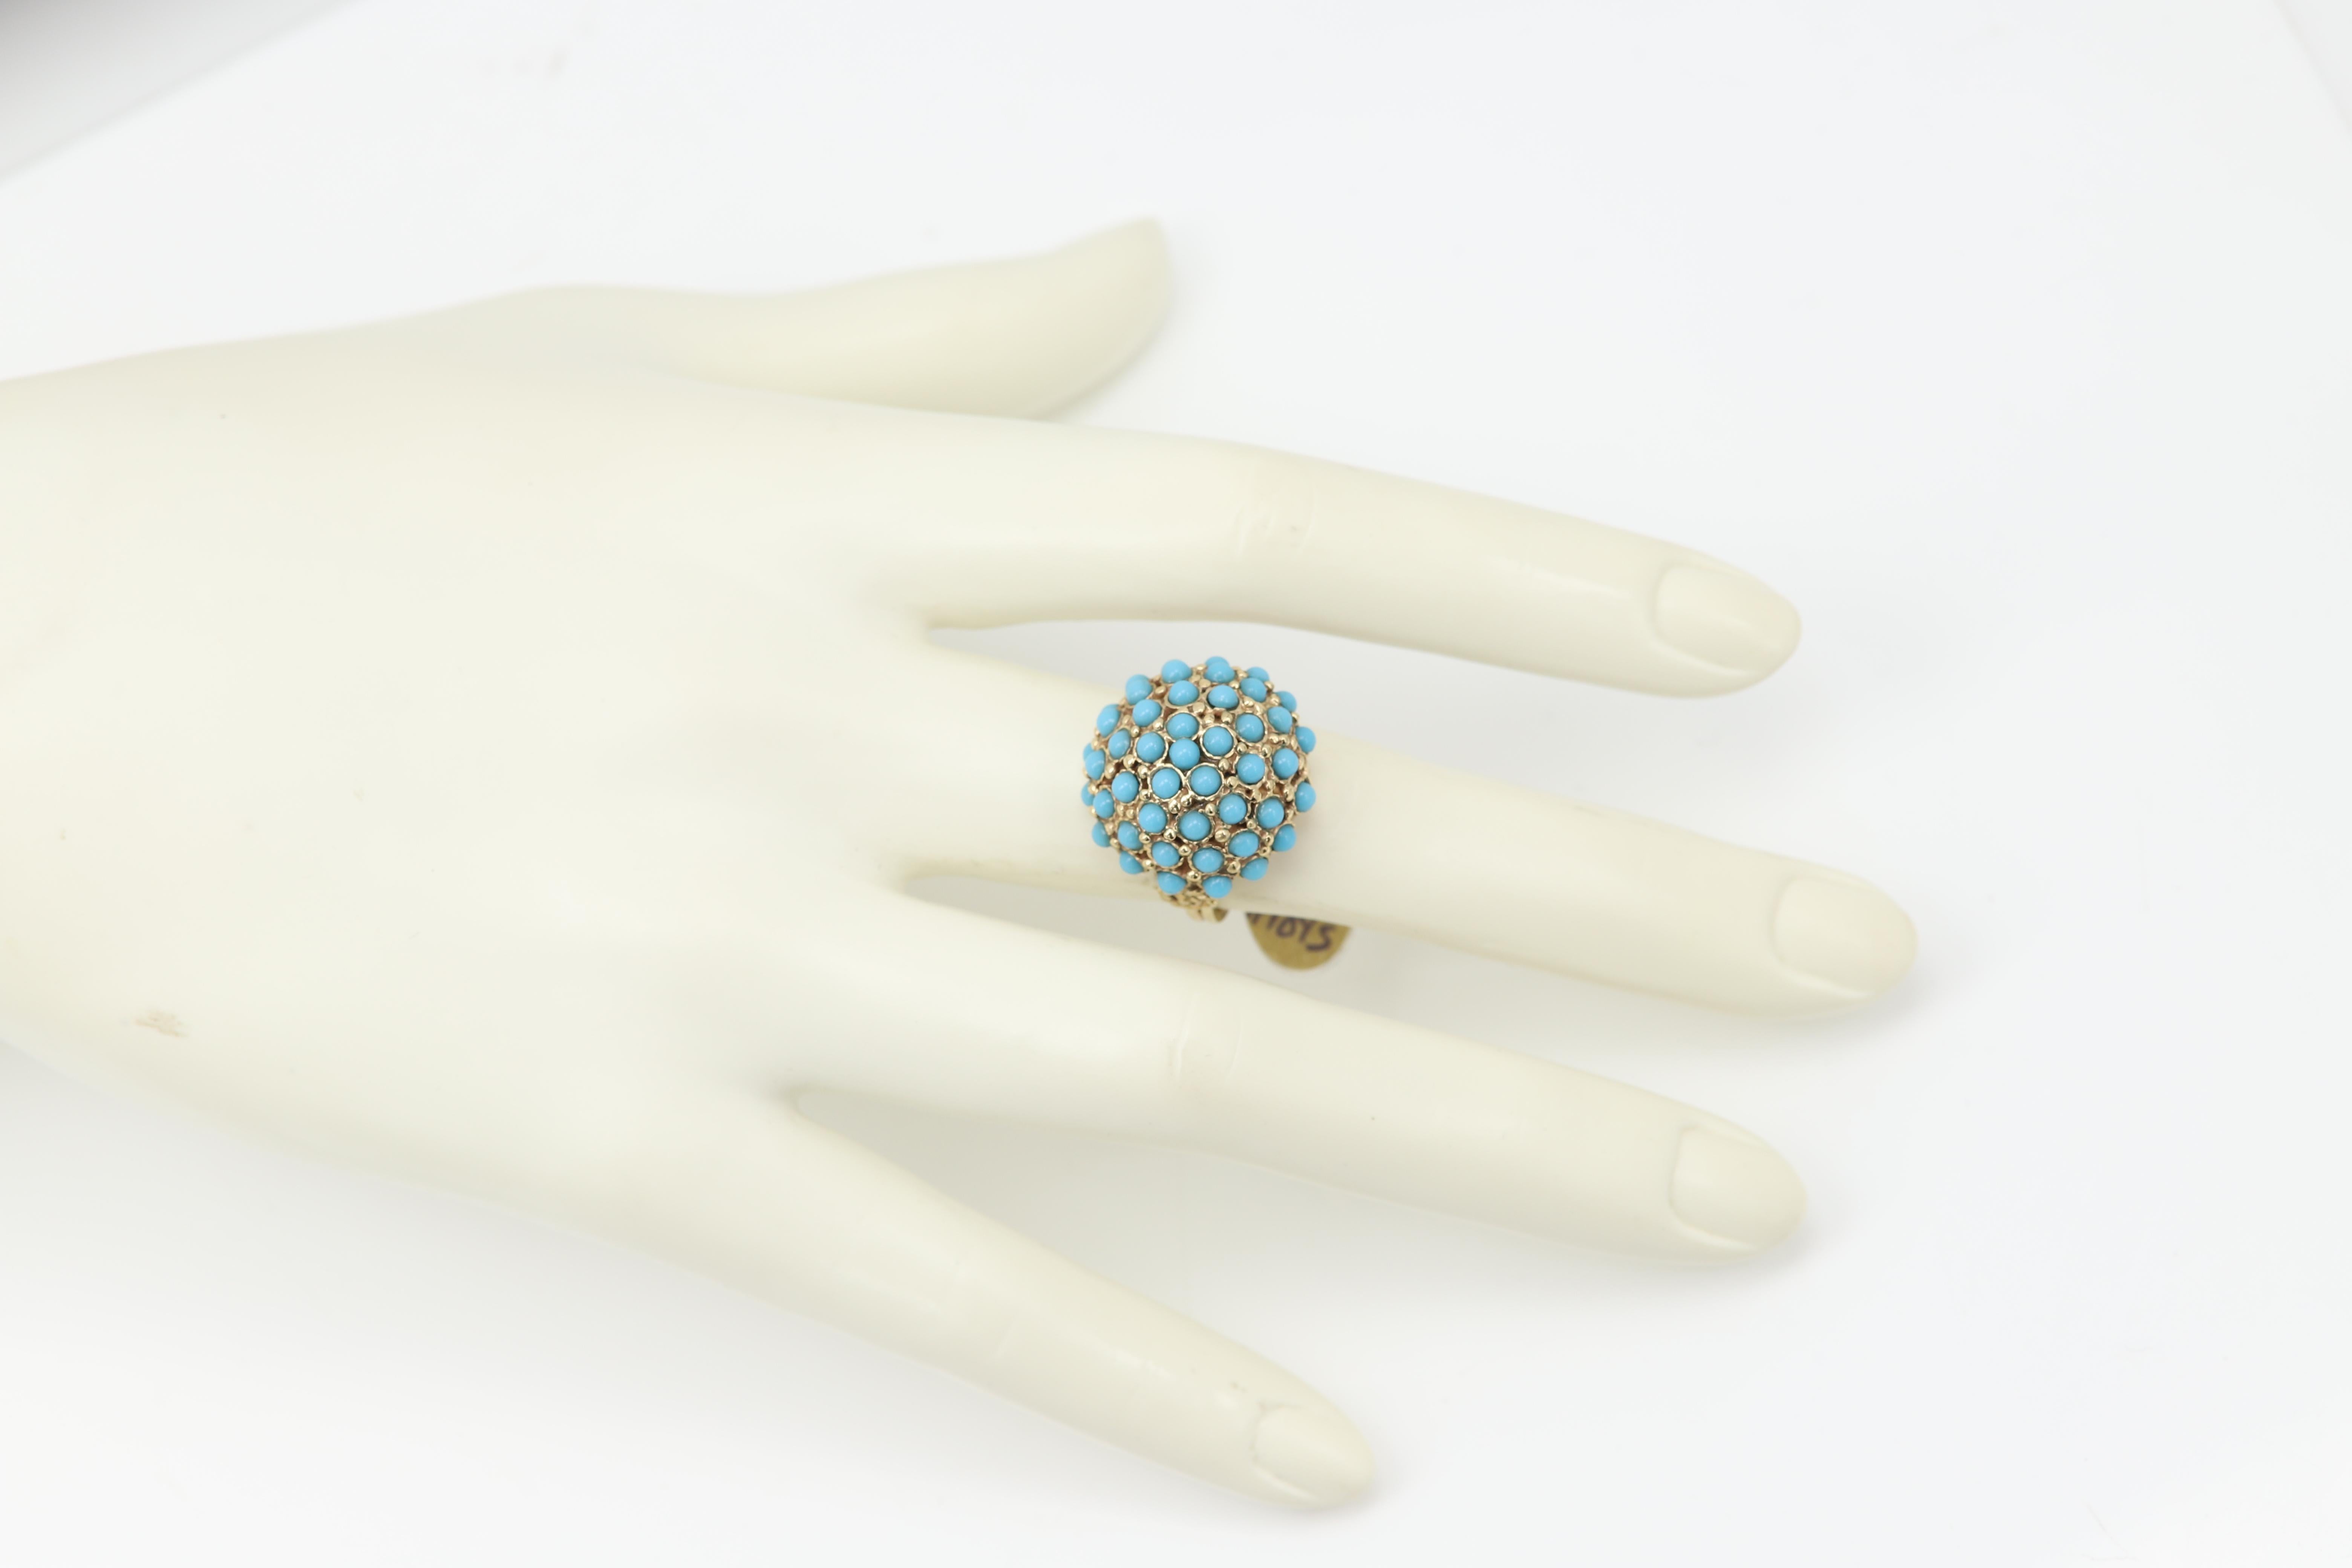 Antique Turquoise Ring 14 Karat Yellow Gold Cluster Design Persian Turquoise For Sale 4